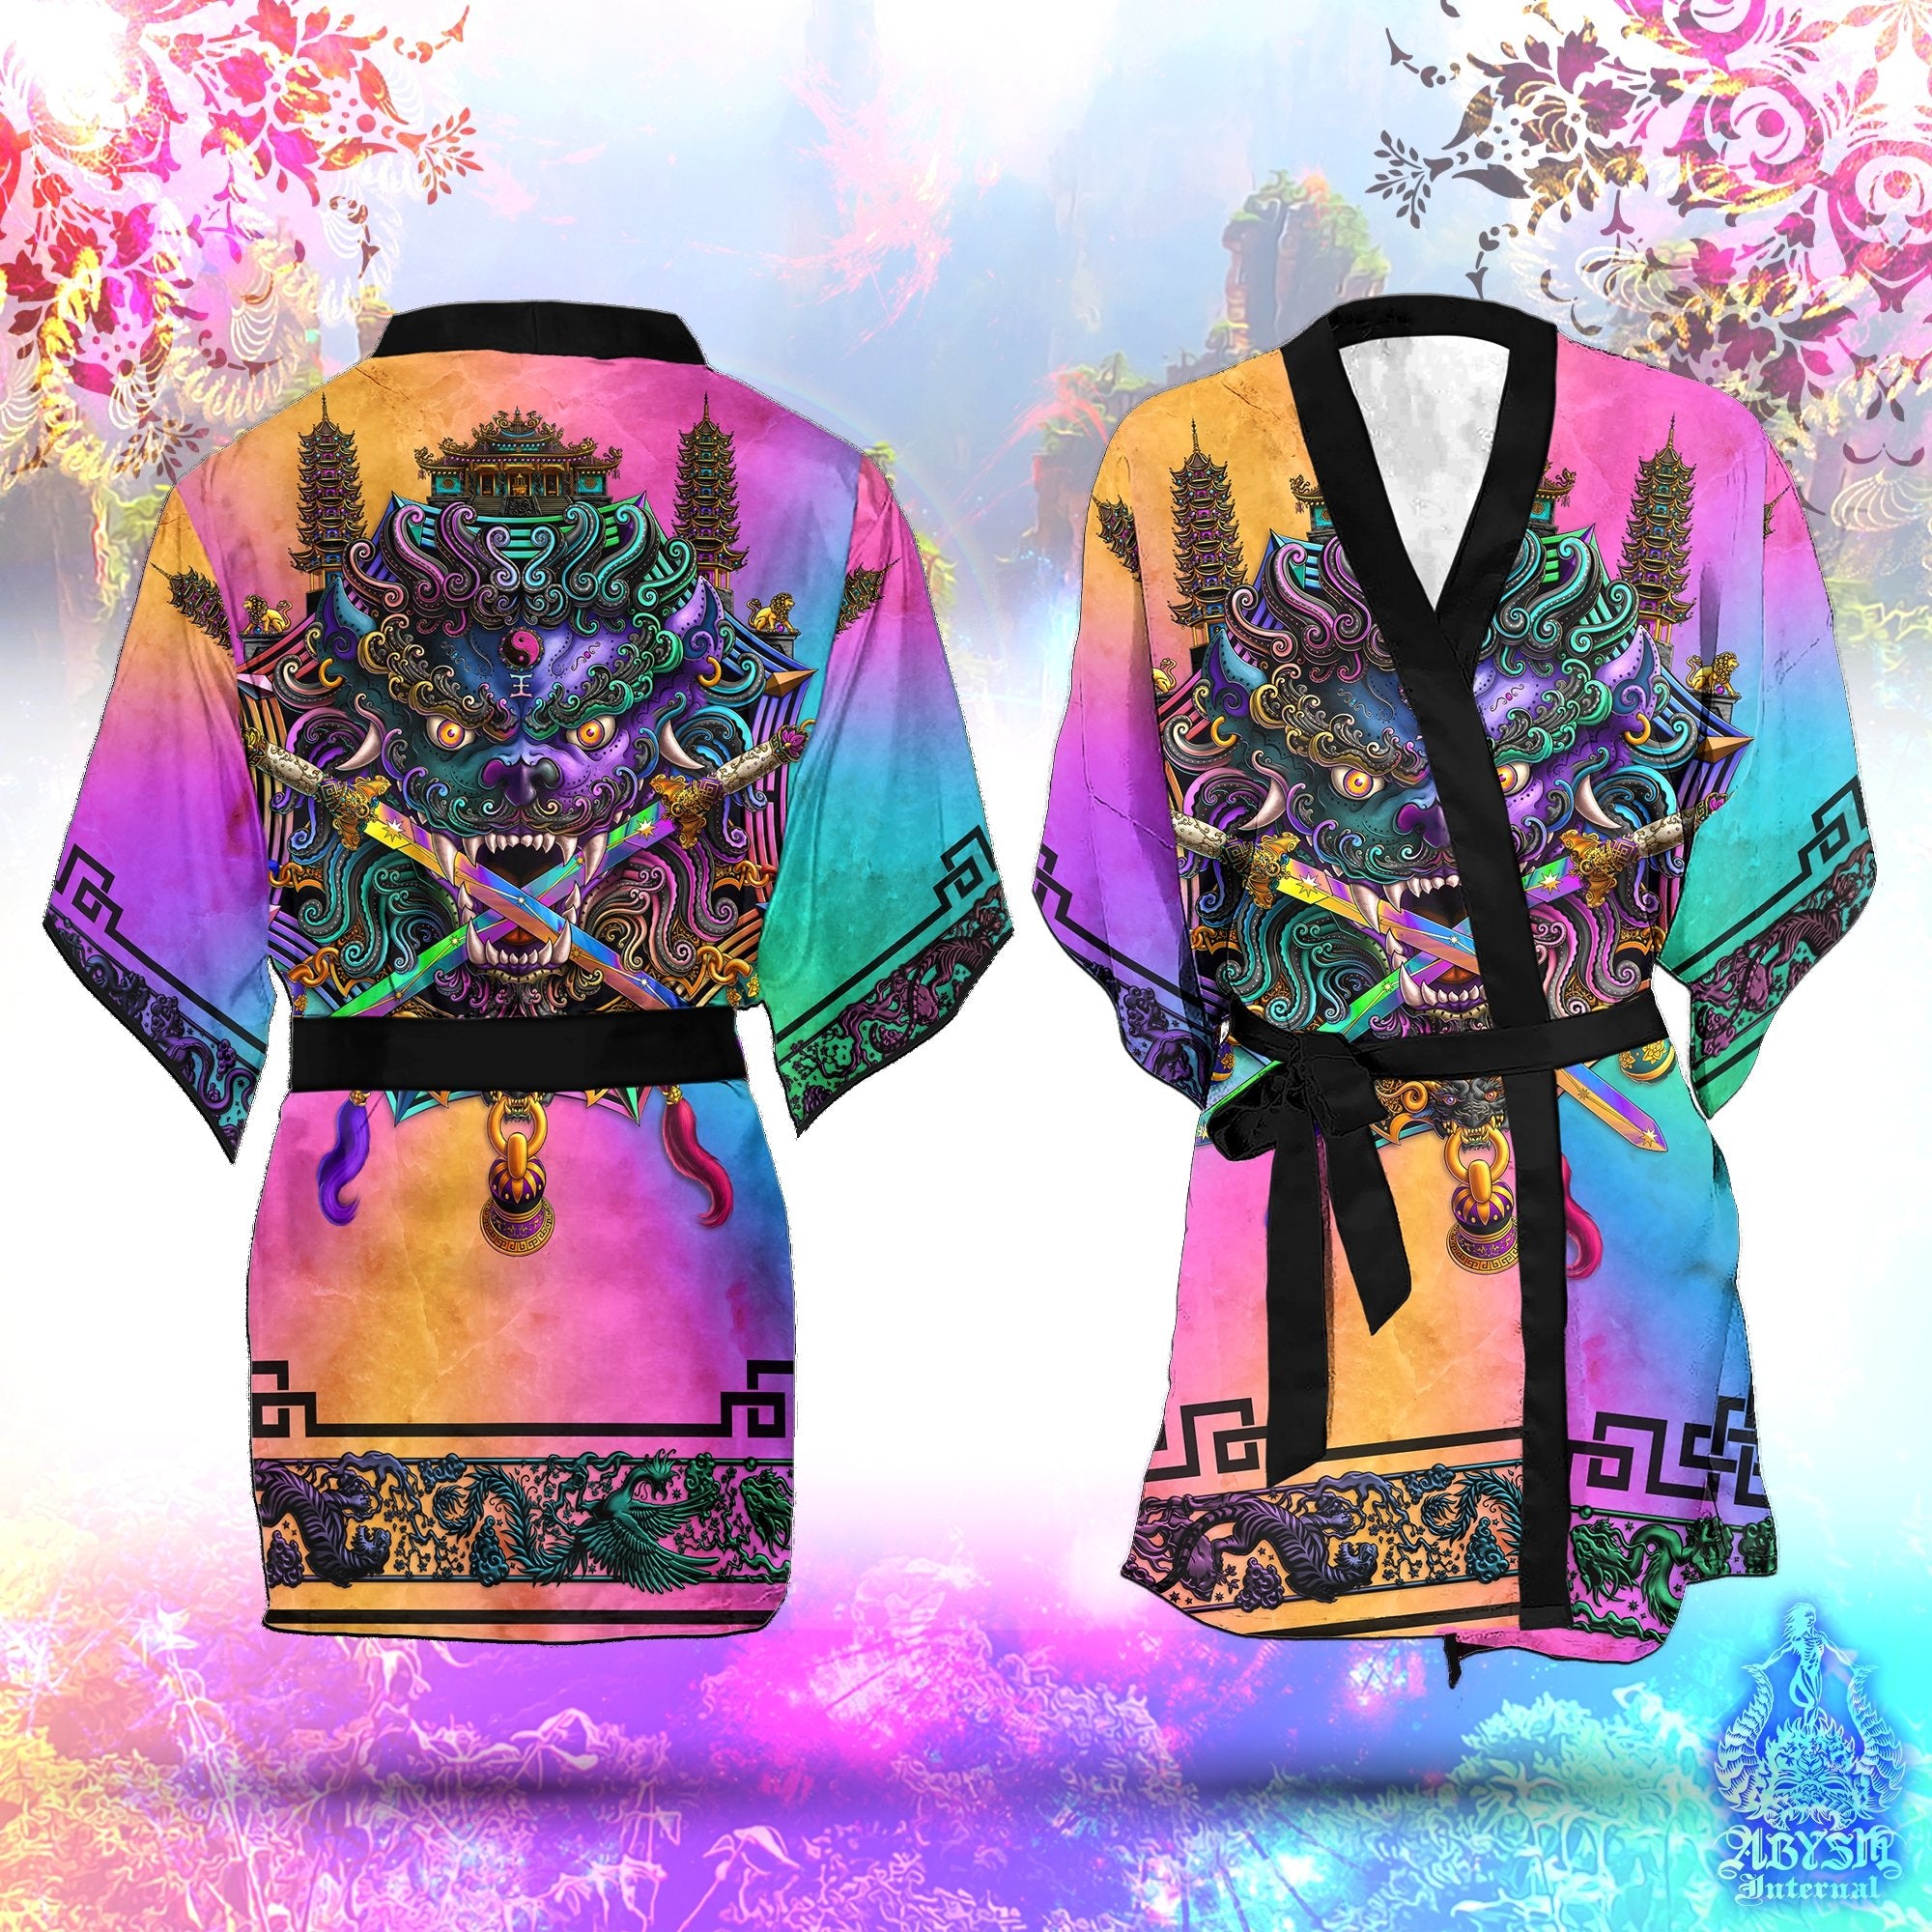 Sword Lion Cover Up, Beach Rave Outfit, Chinese Party Kimono, Taiwan Summer Festival Robe, Asian Indie and Alternative Clothing, Unisex - Holographic Pastel Punk Black - Abysm Internal